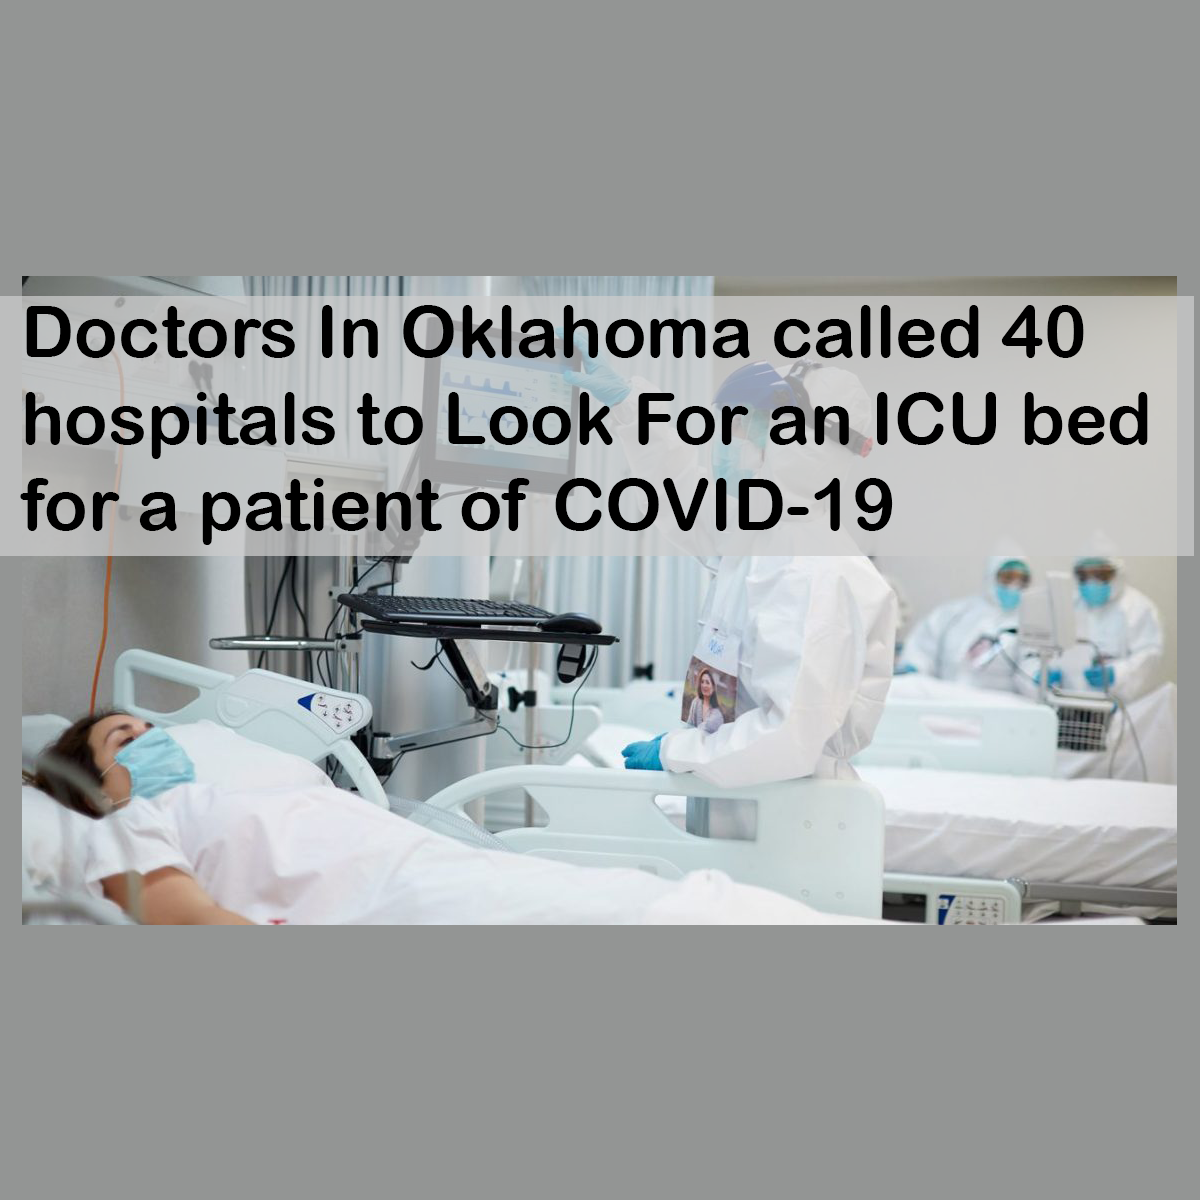 Doctors In Oklahoma called 40 hospitals to Look For an ICU bed for a patient of COVID-19